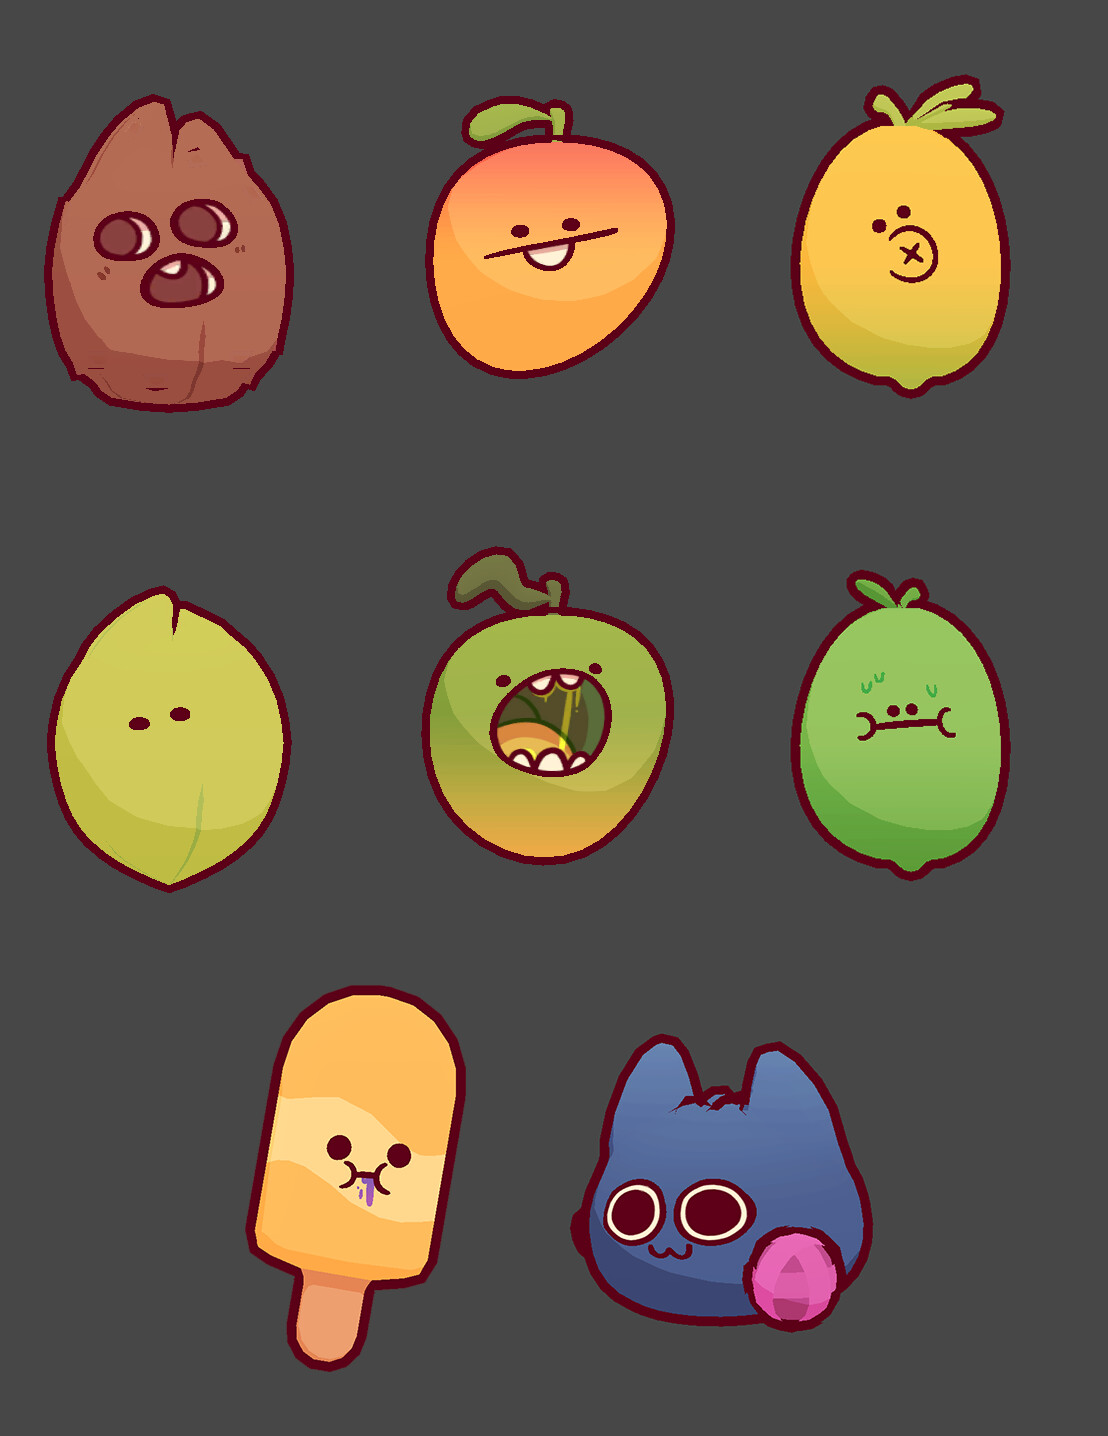 Just a few of the various fruits that I created